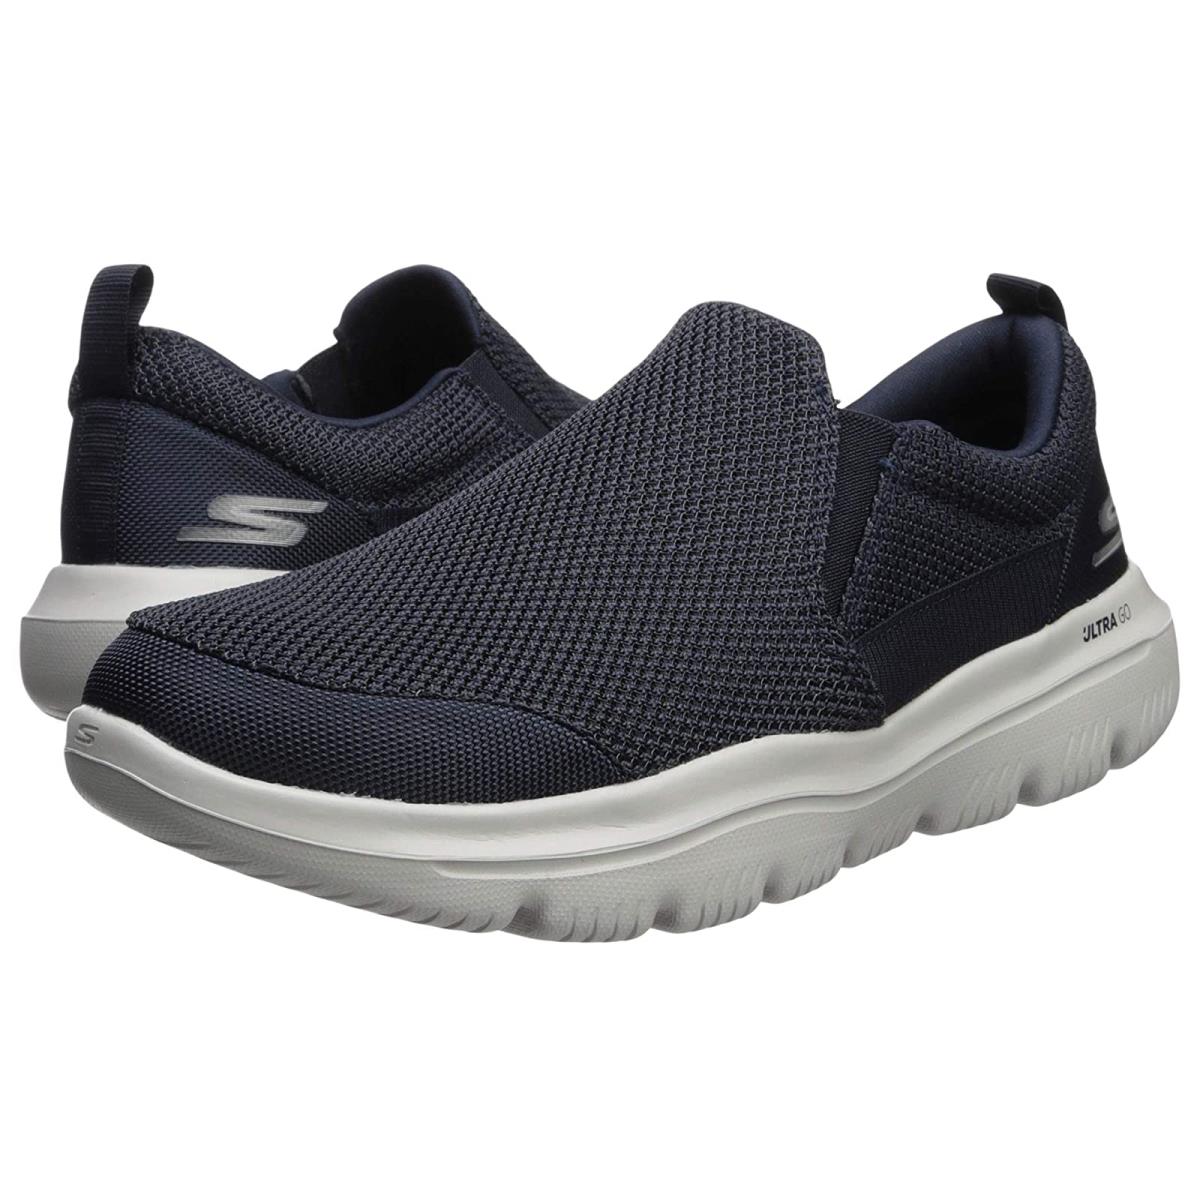 Man`s Shoes Skechers Performance Go Walk Evolution Ultra - Impeccable Navy/Gray